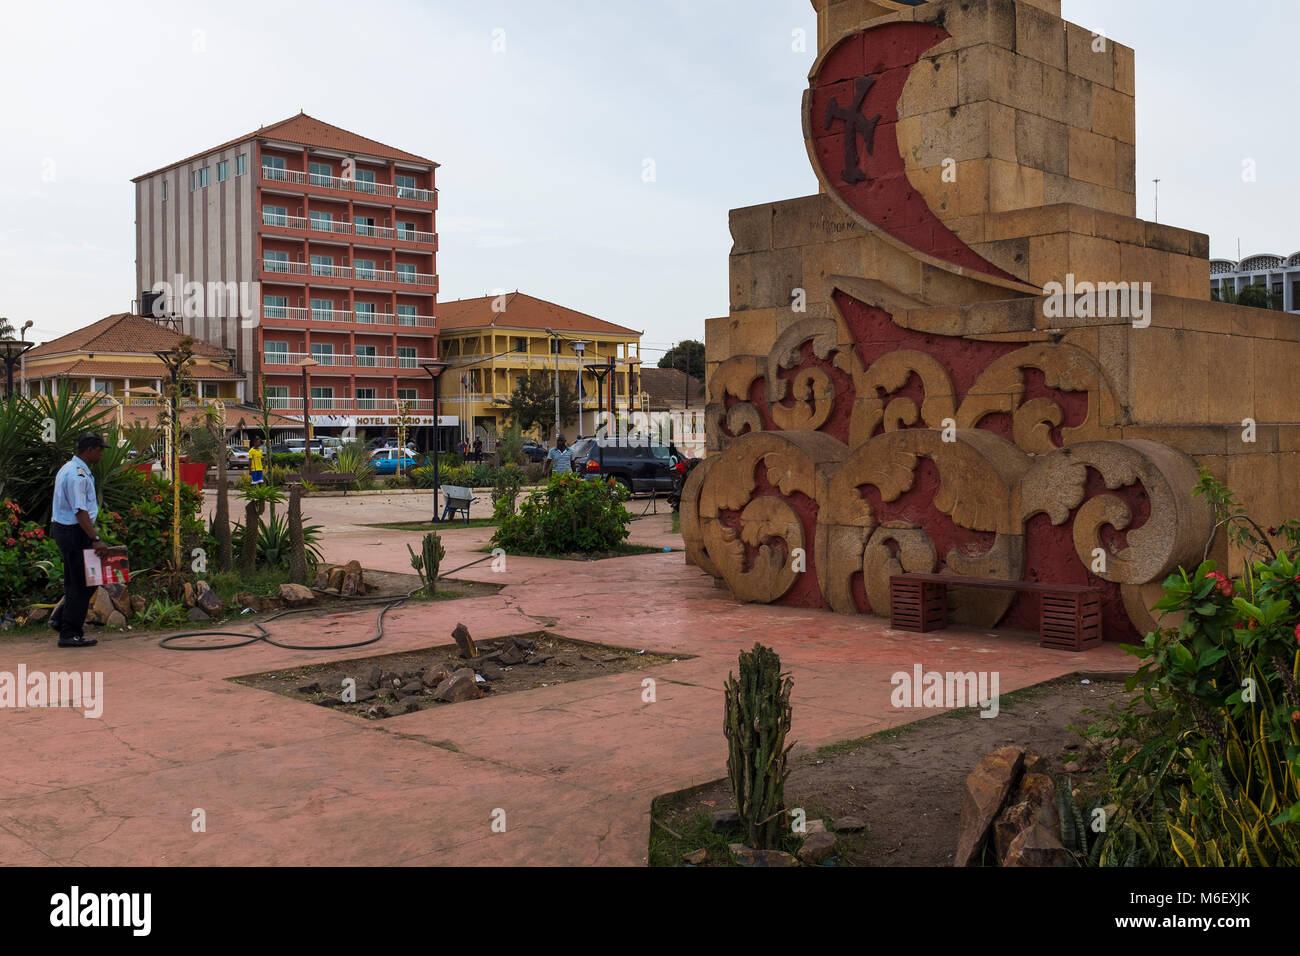 Bissau, Republic of Guinea-Bissau - January 28, 2018: View of the Imperio Square (Praca do Imperio) in the city of Bissau, Republic of Guinea-Bissau Stock Photo